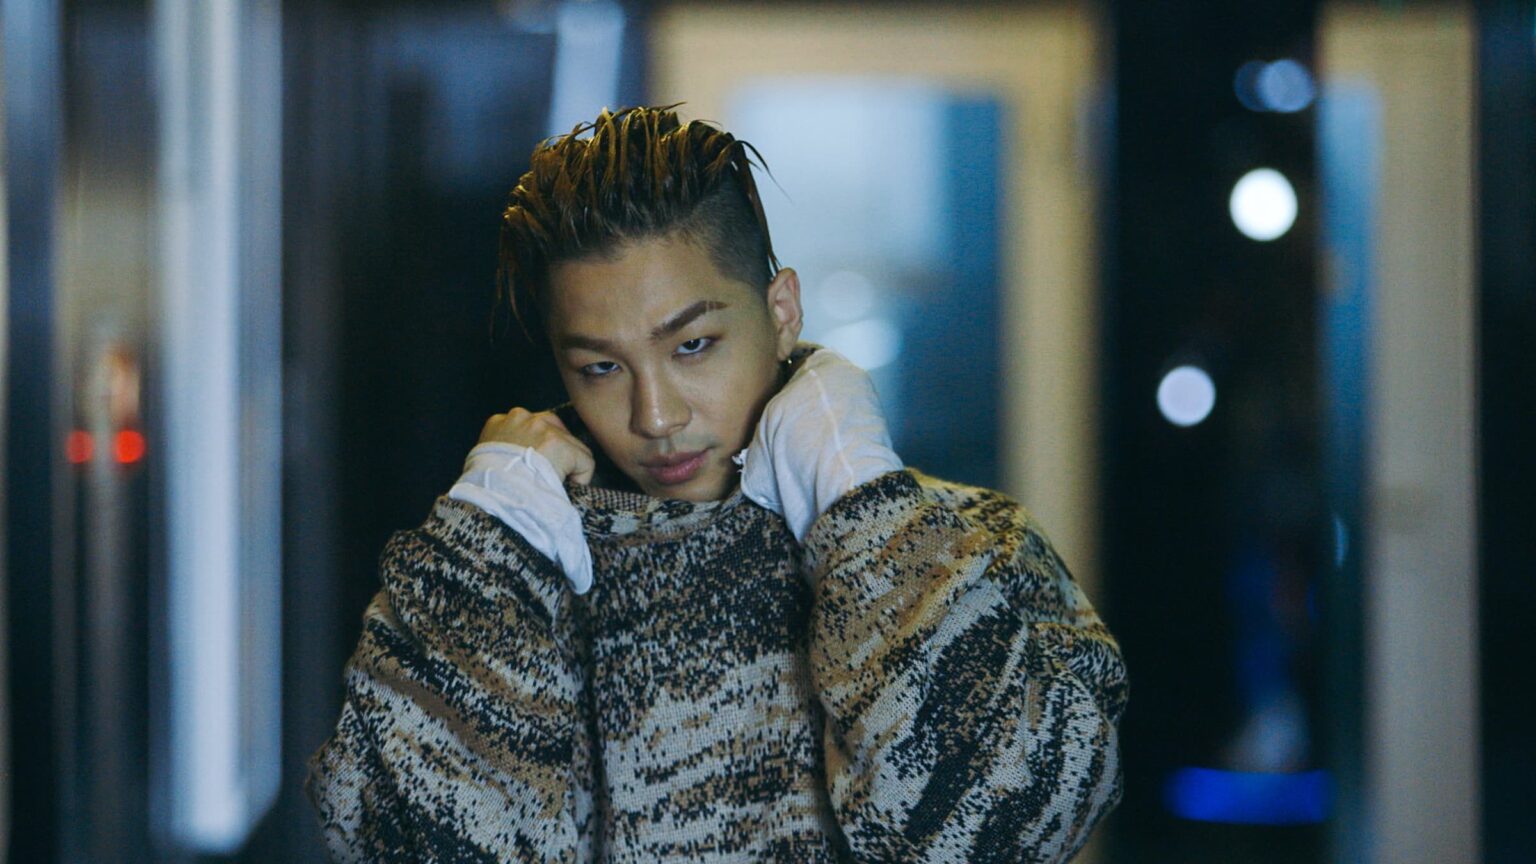 Korean singer Taeyang, from the famous boyband BIGBANG, has announced he's having a baby! See who his wife is and when he will return to the stage.